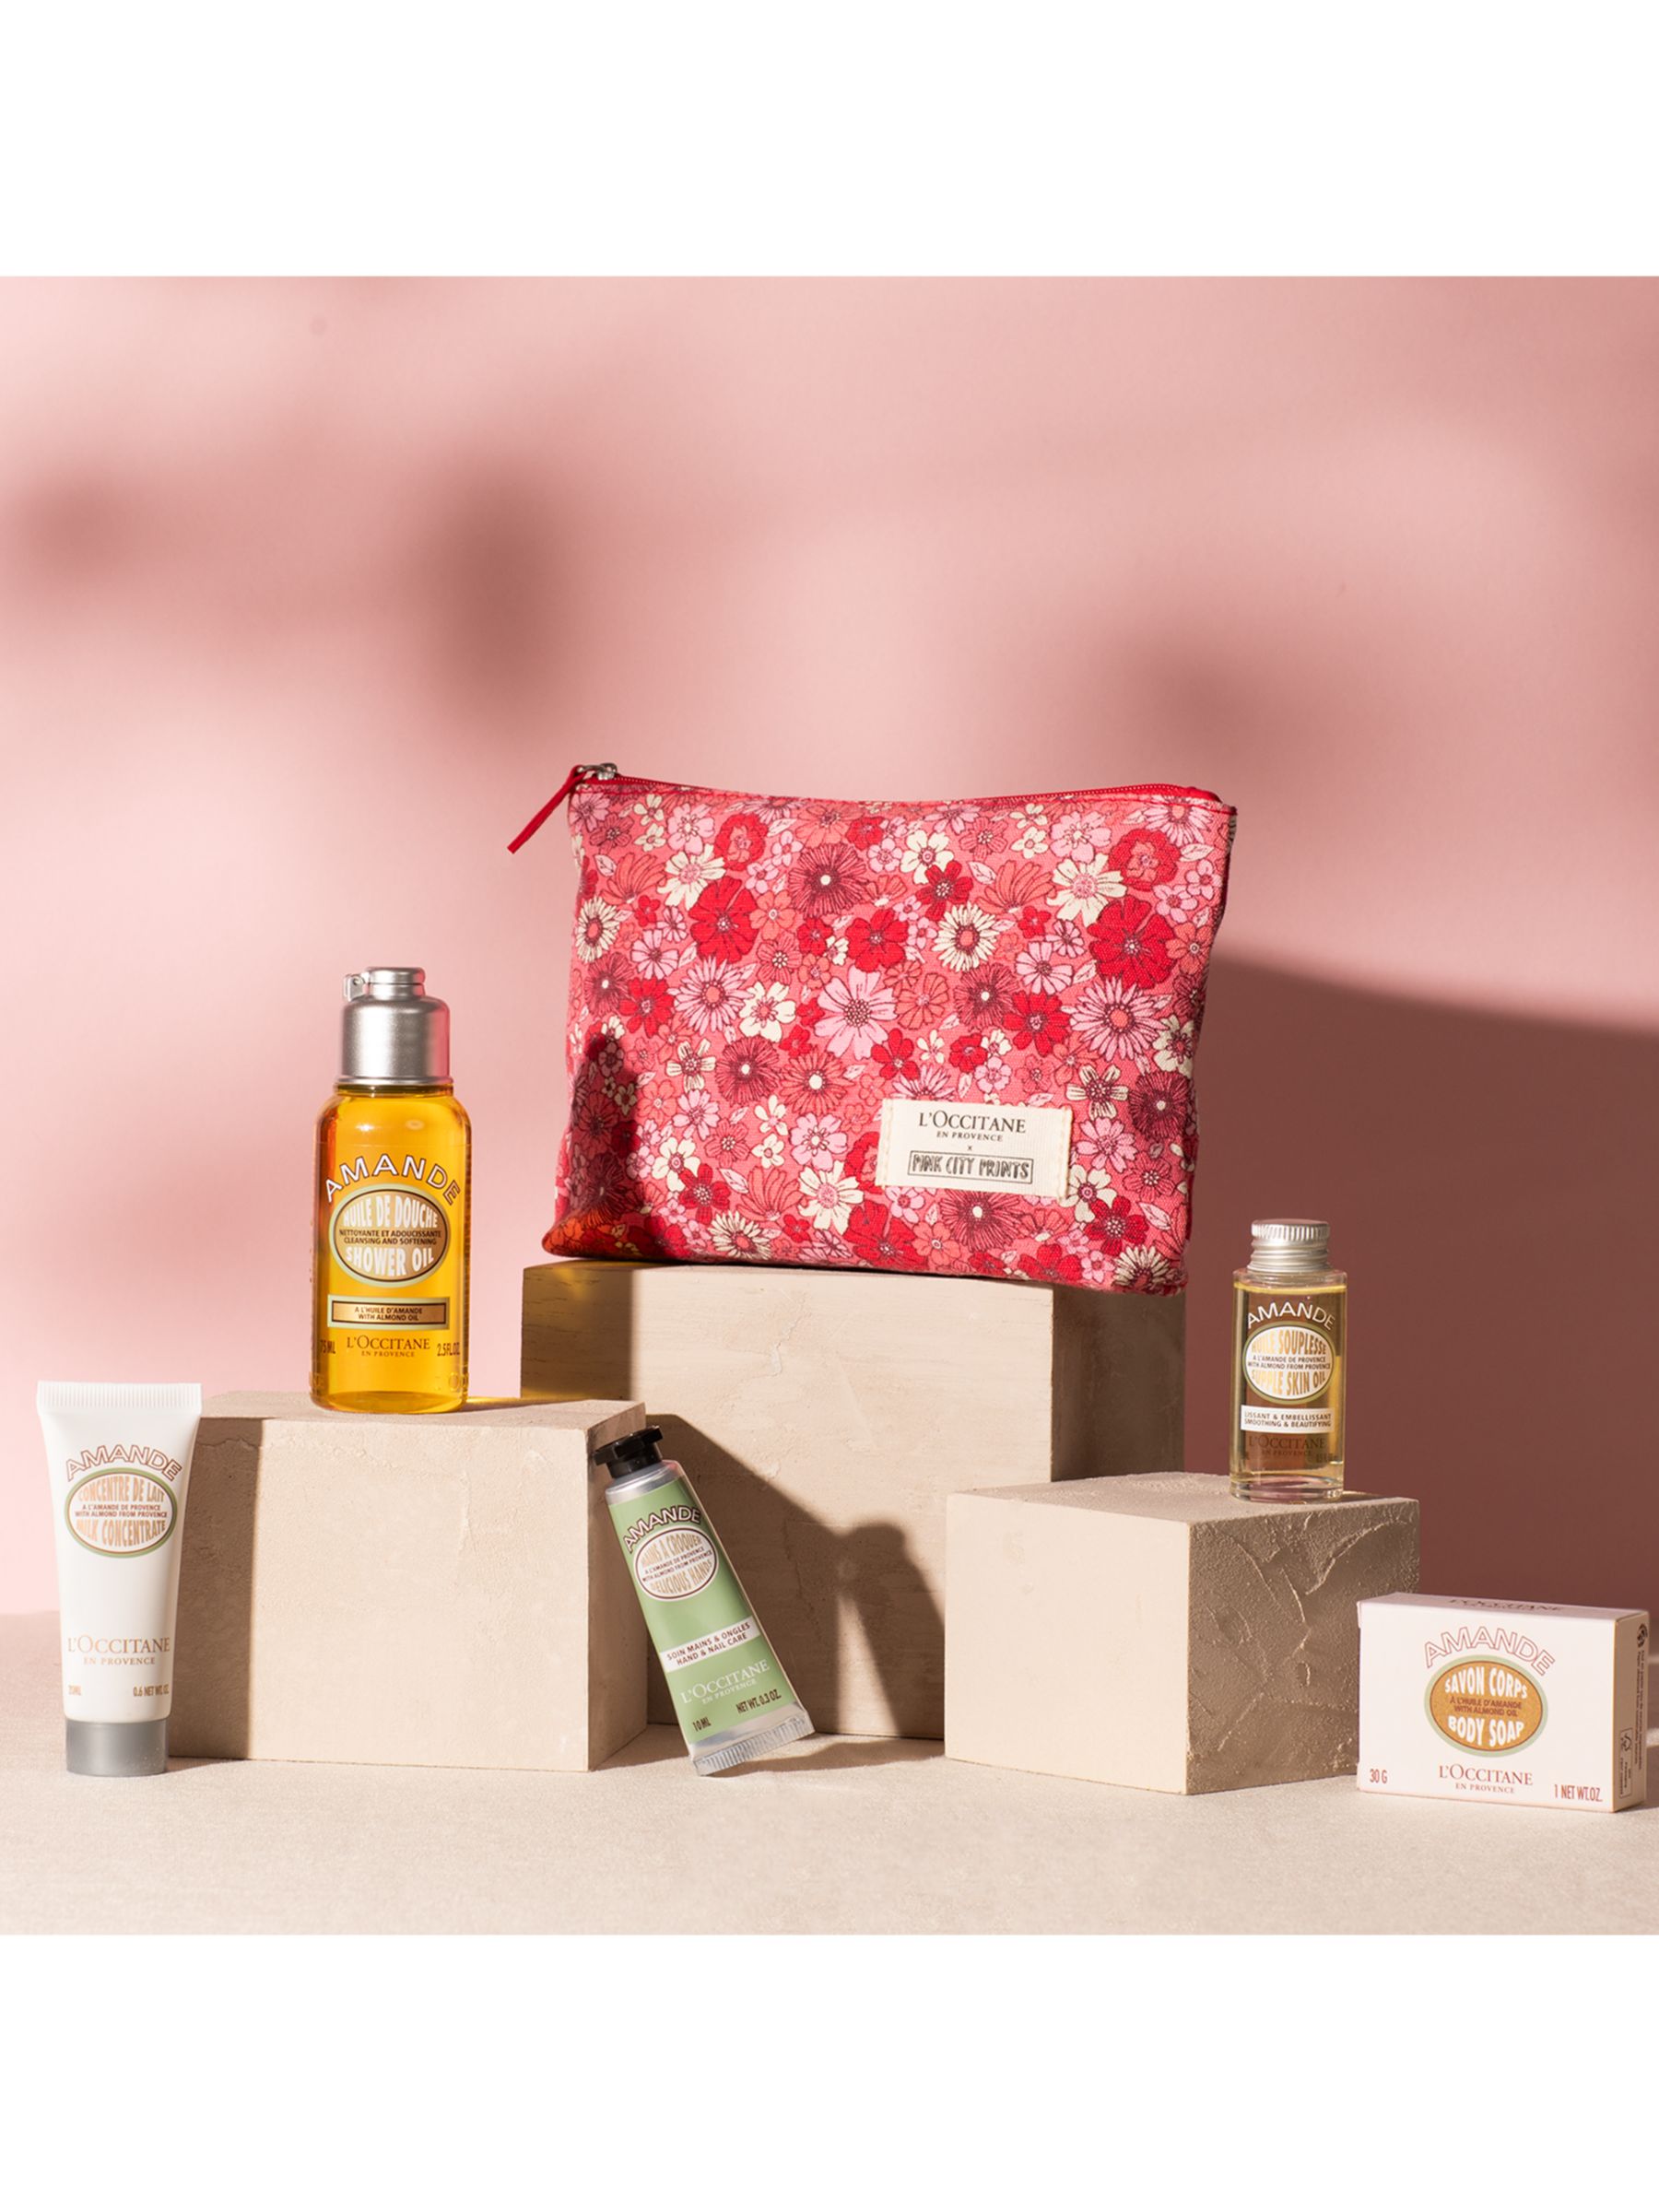 L'OCCITANE Almond Discovery Collection x Pink City Prints Bodycare Gift Set 2